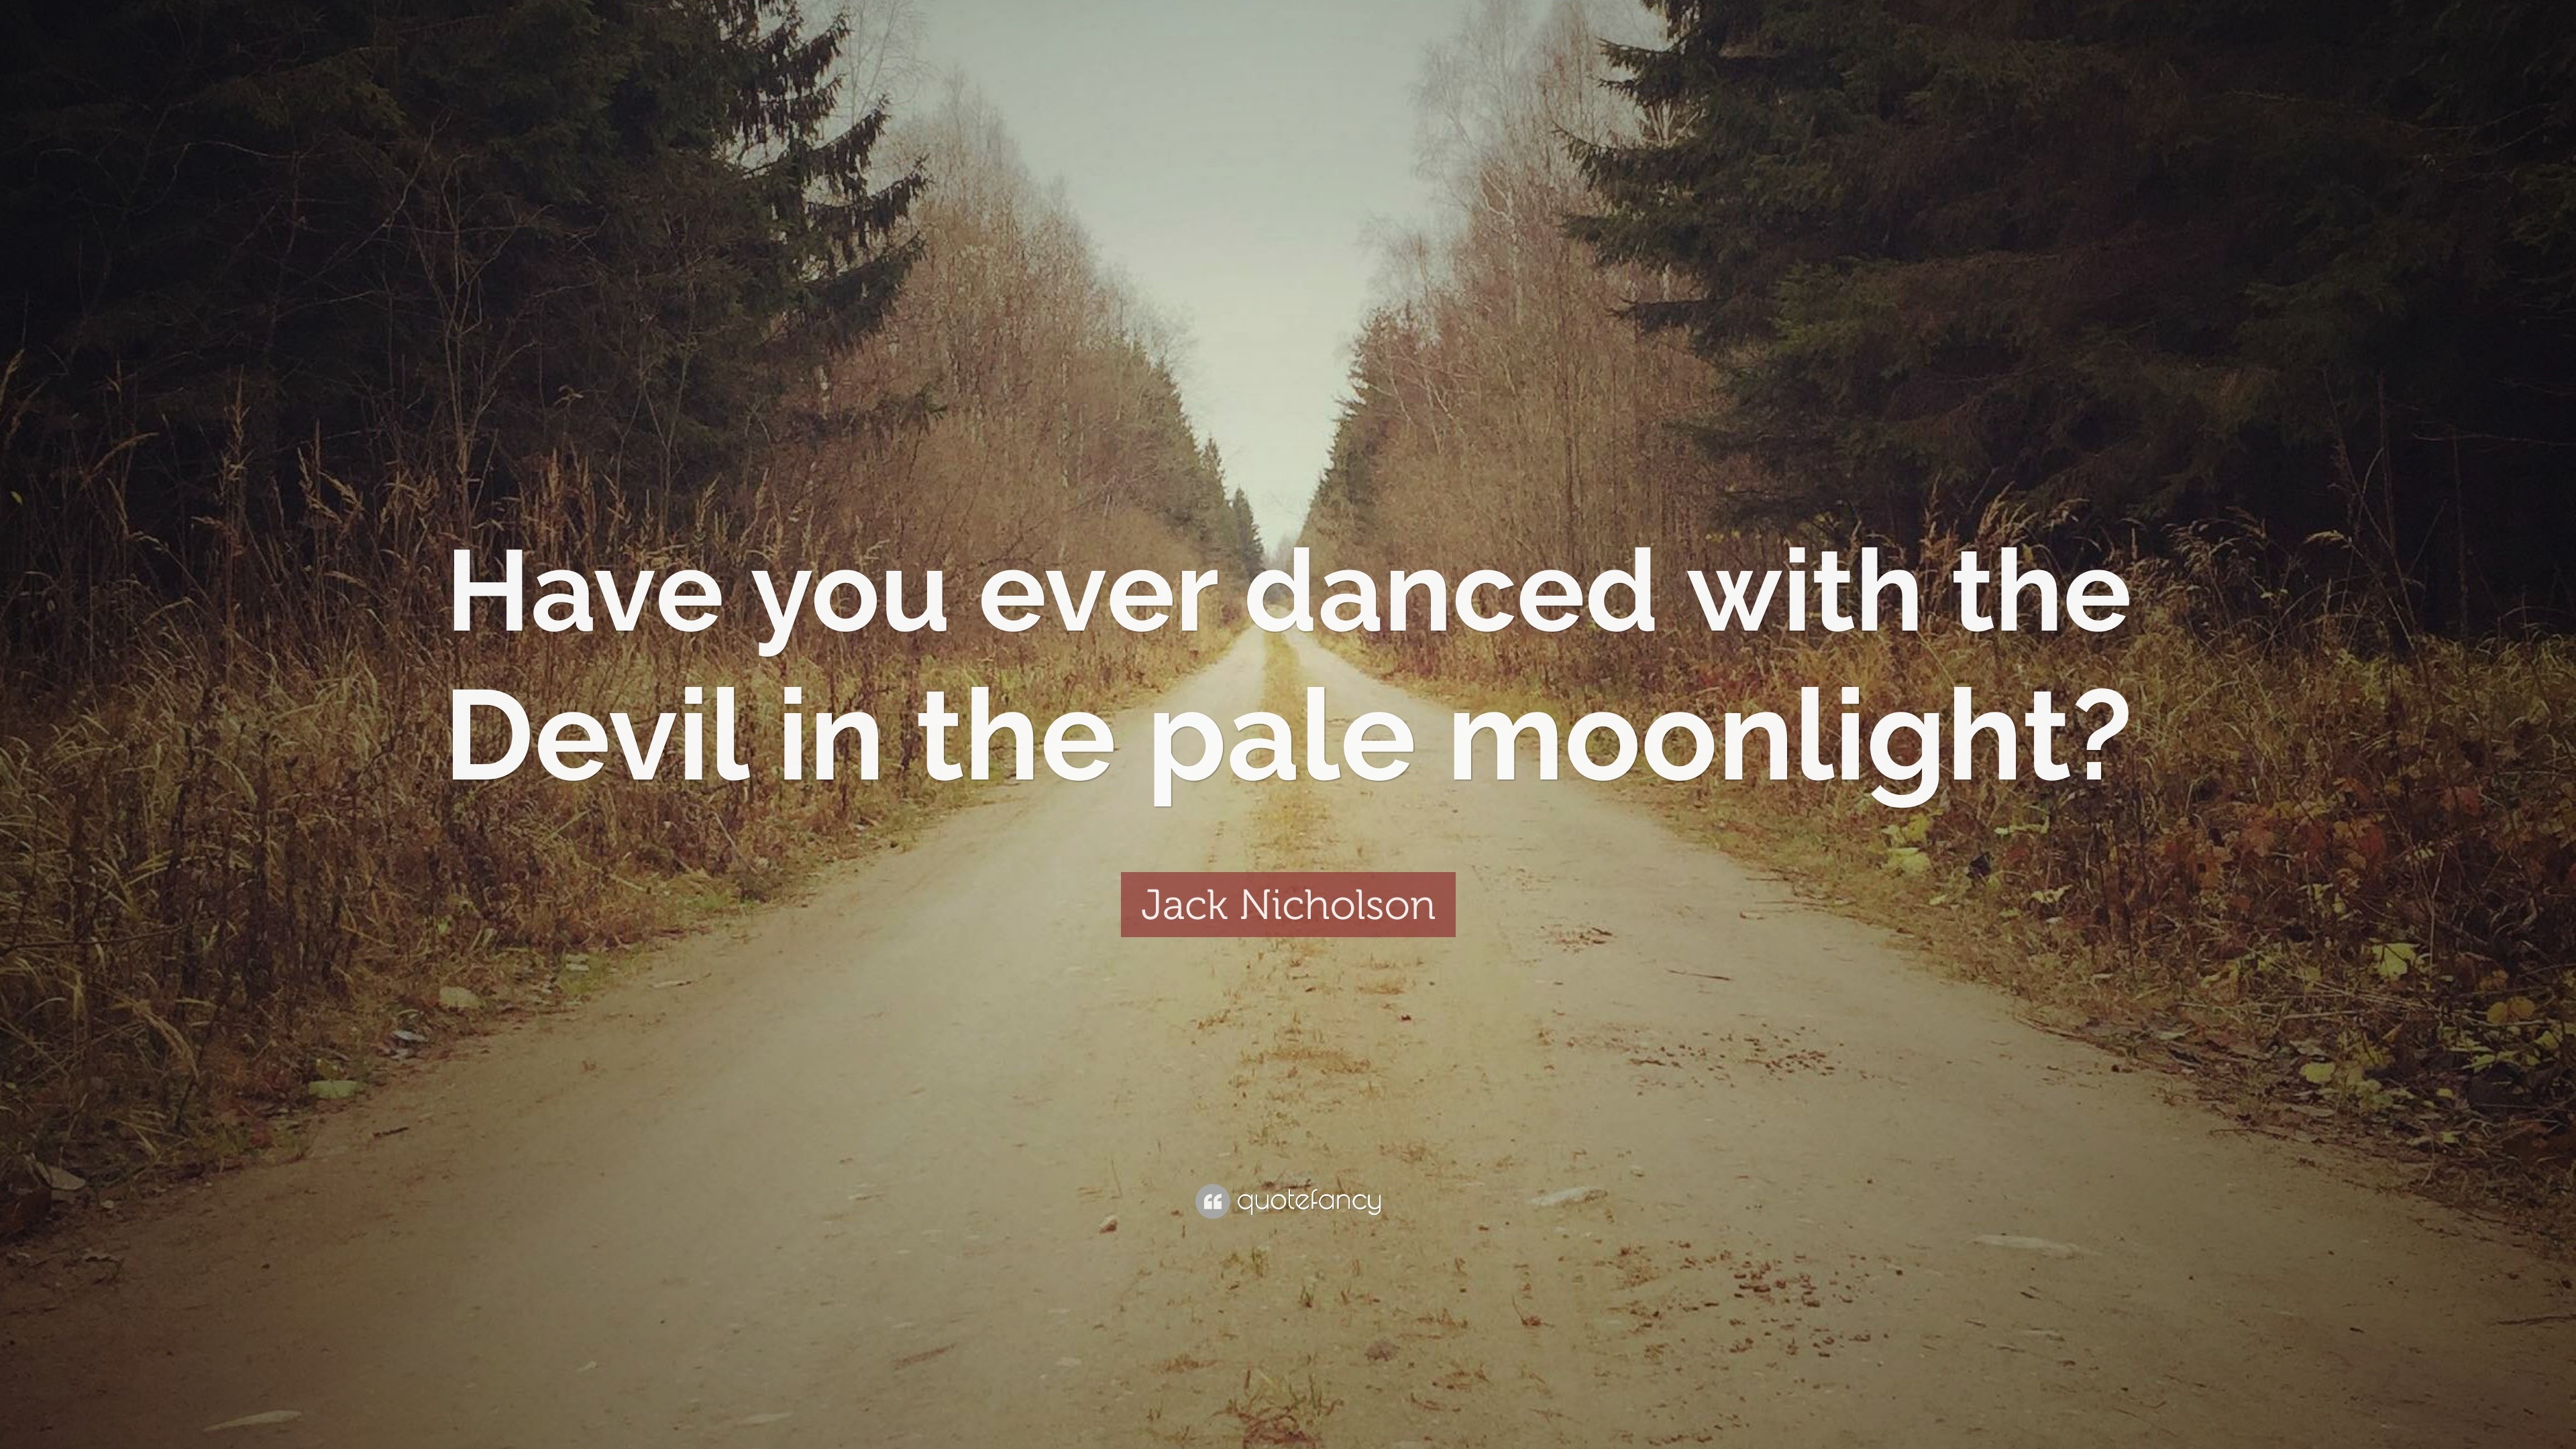 Jack Nicholson Quote: "Have you ever danced with the Devil in the pale moonlight?"